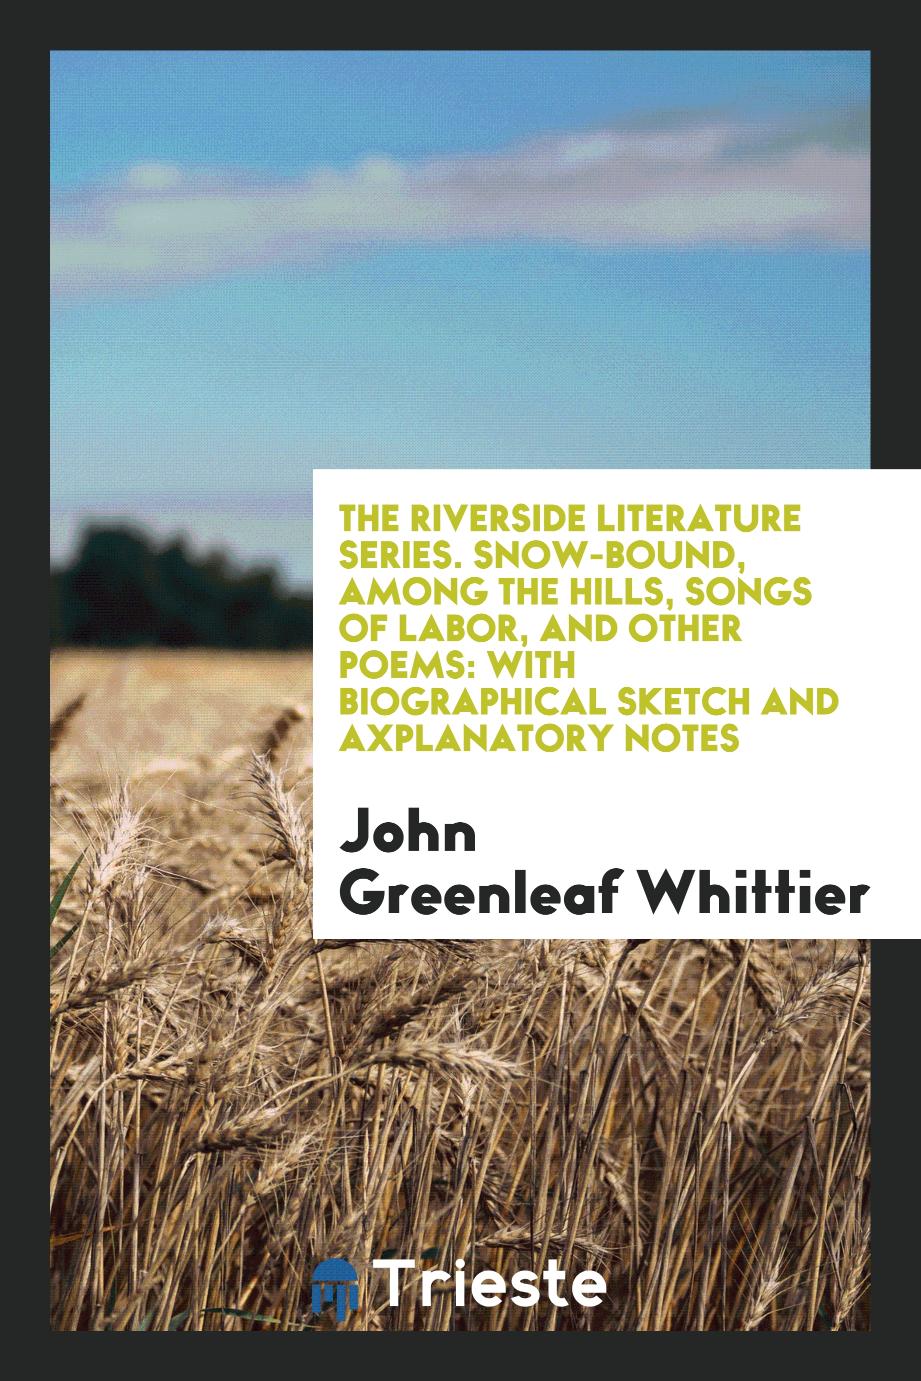 The Riverside Literature Series. Snow-Bound, among the Hills, Songs of Labor, and Other Poems: With Biographical Sketch and Axplanatory Notes